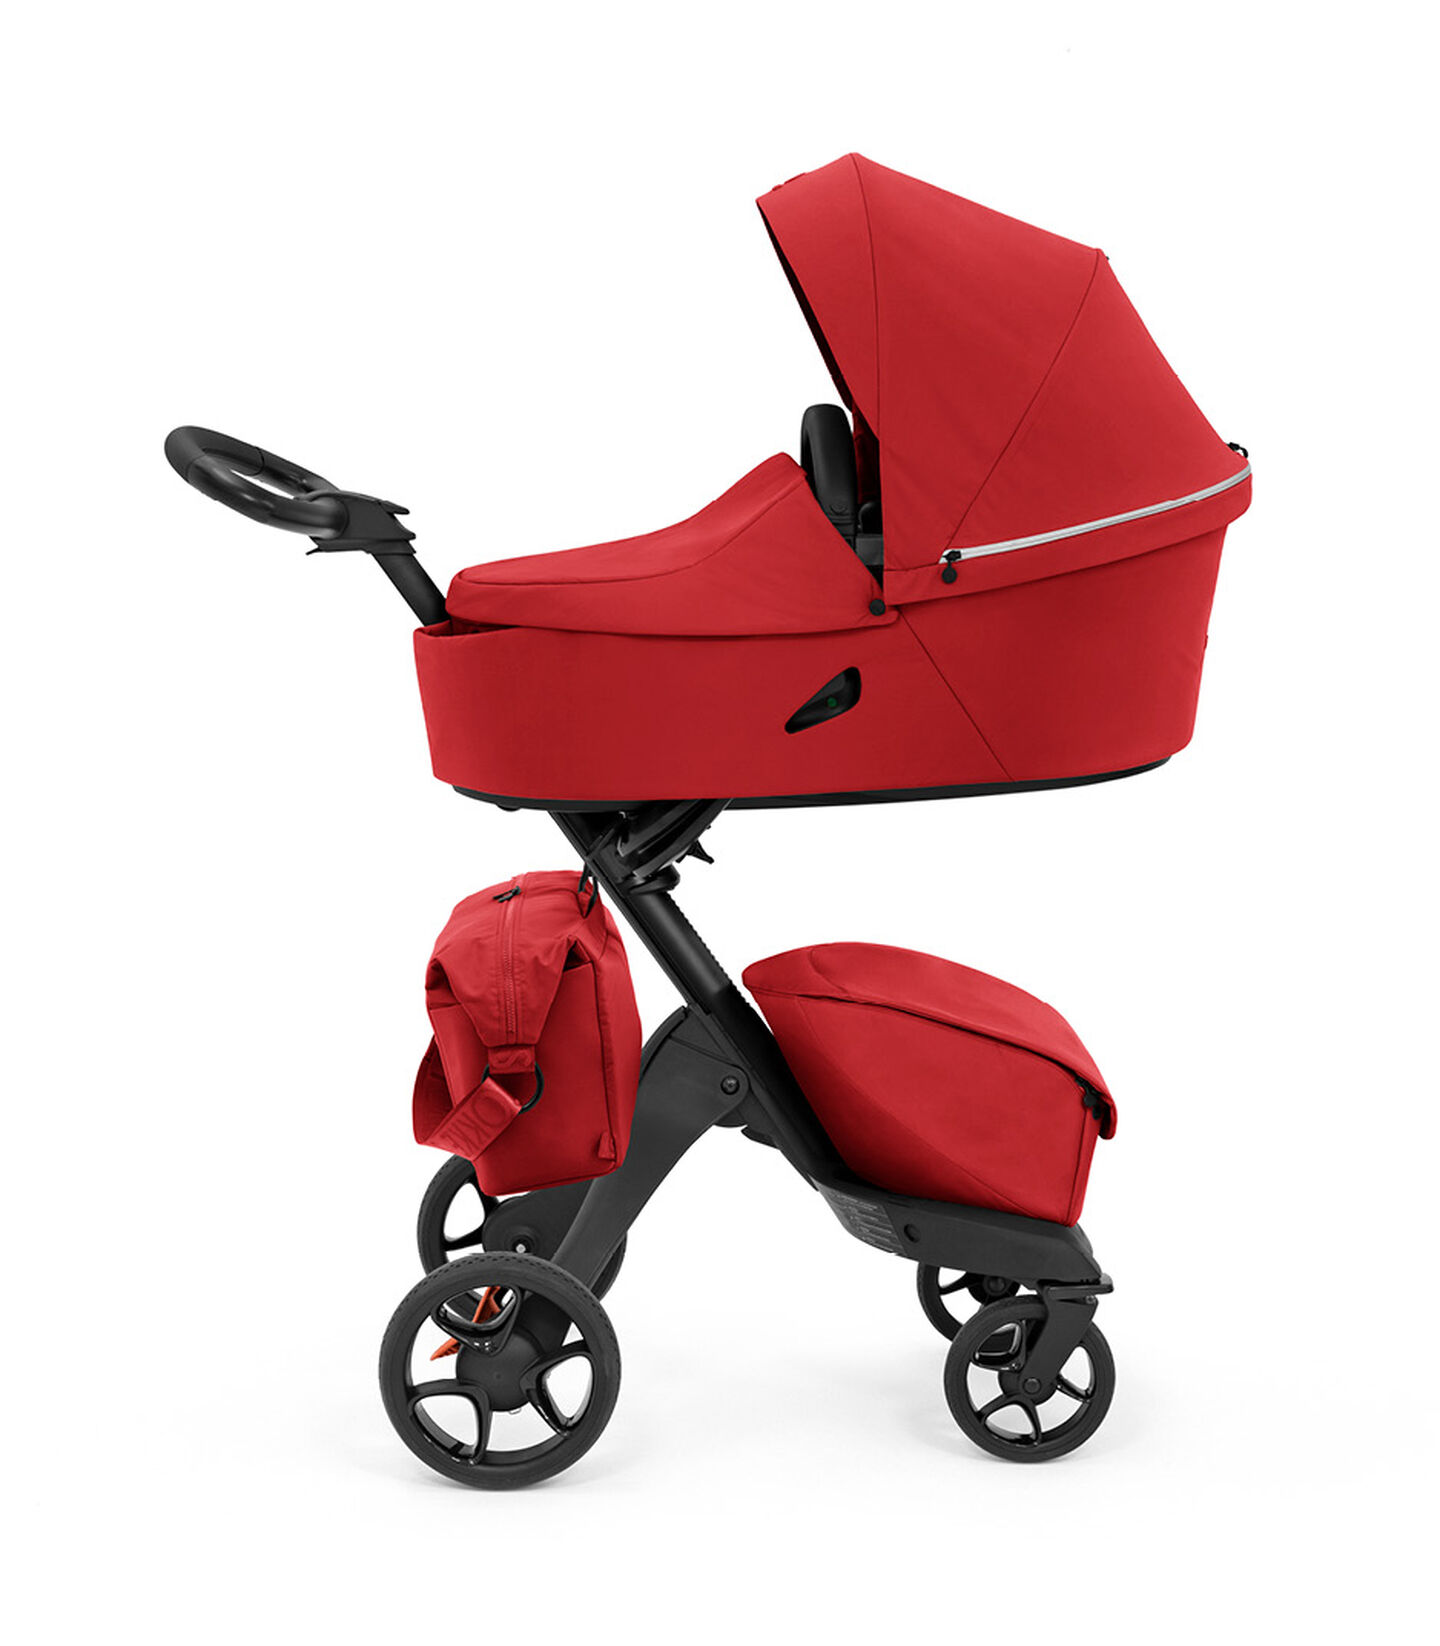 Stokke® Xplory® Pusletaske Ruby Red, Ruby Red, mainview view 4